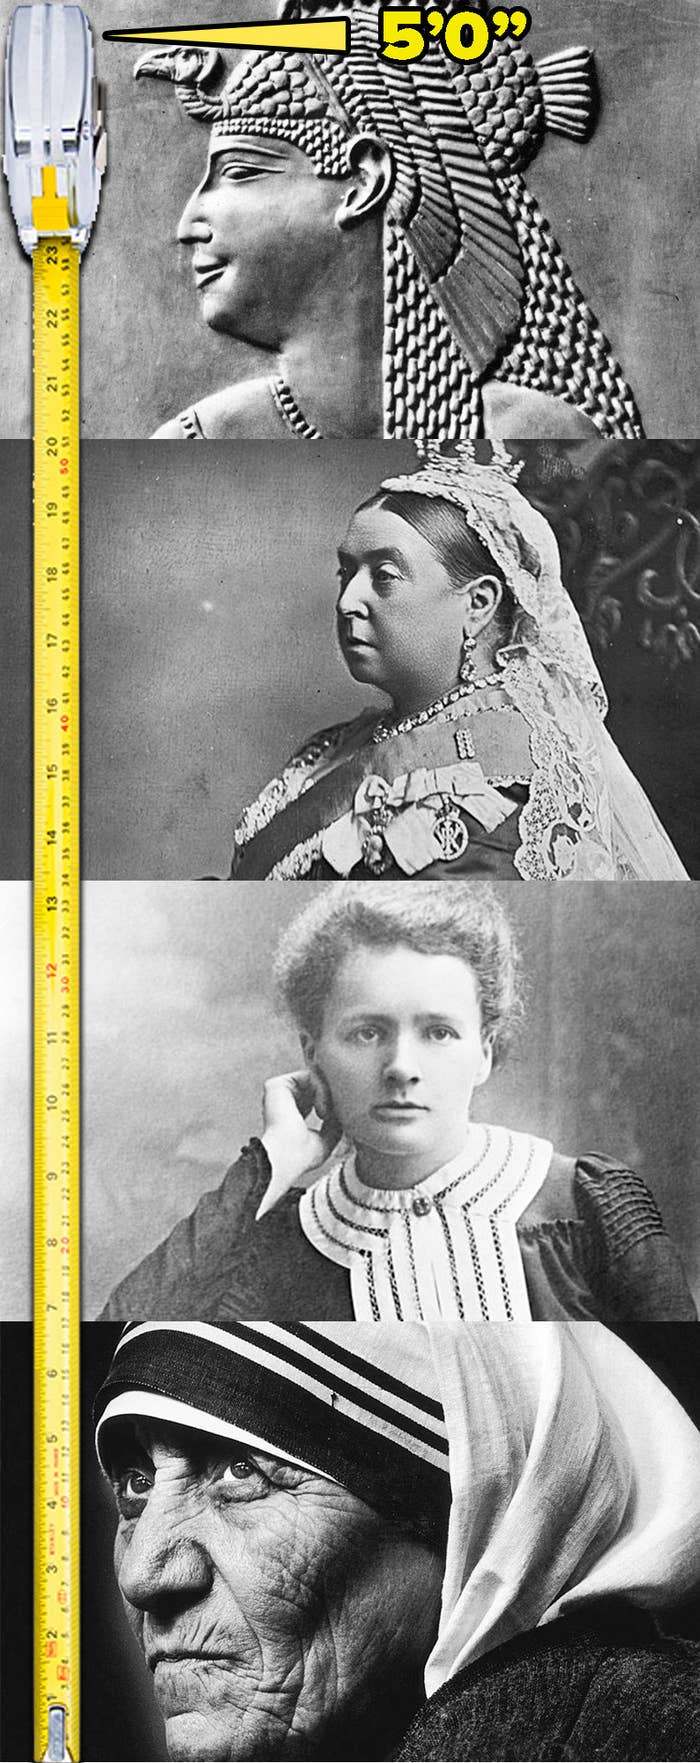 Stacked images of Cleopatra, Queen Victoria, Marie Curie, and Mother Theresa next to a measuring tape